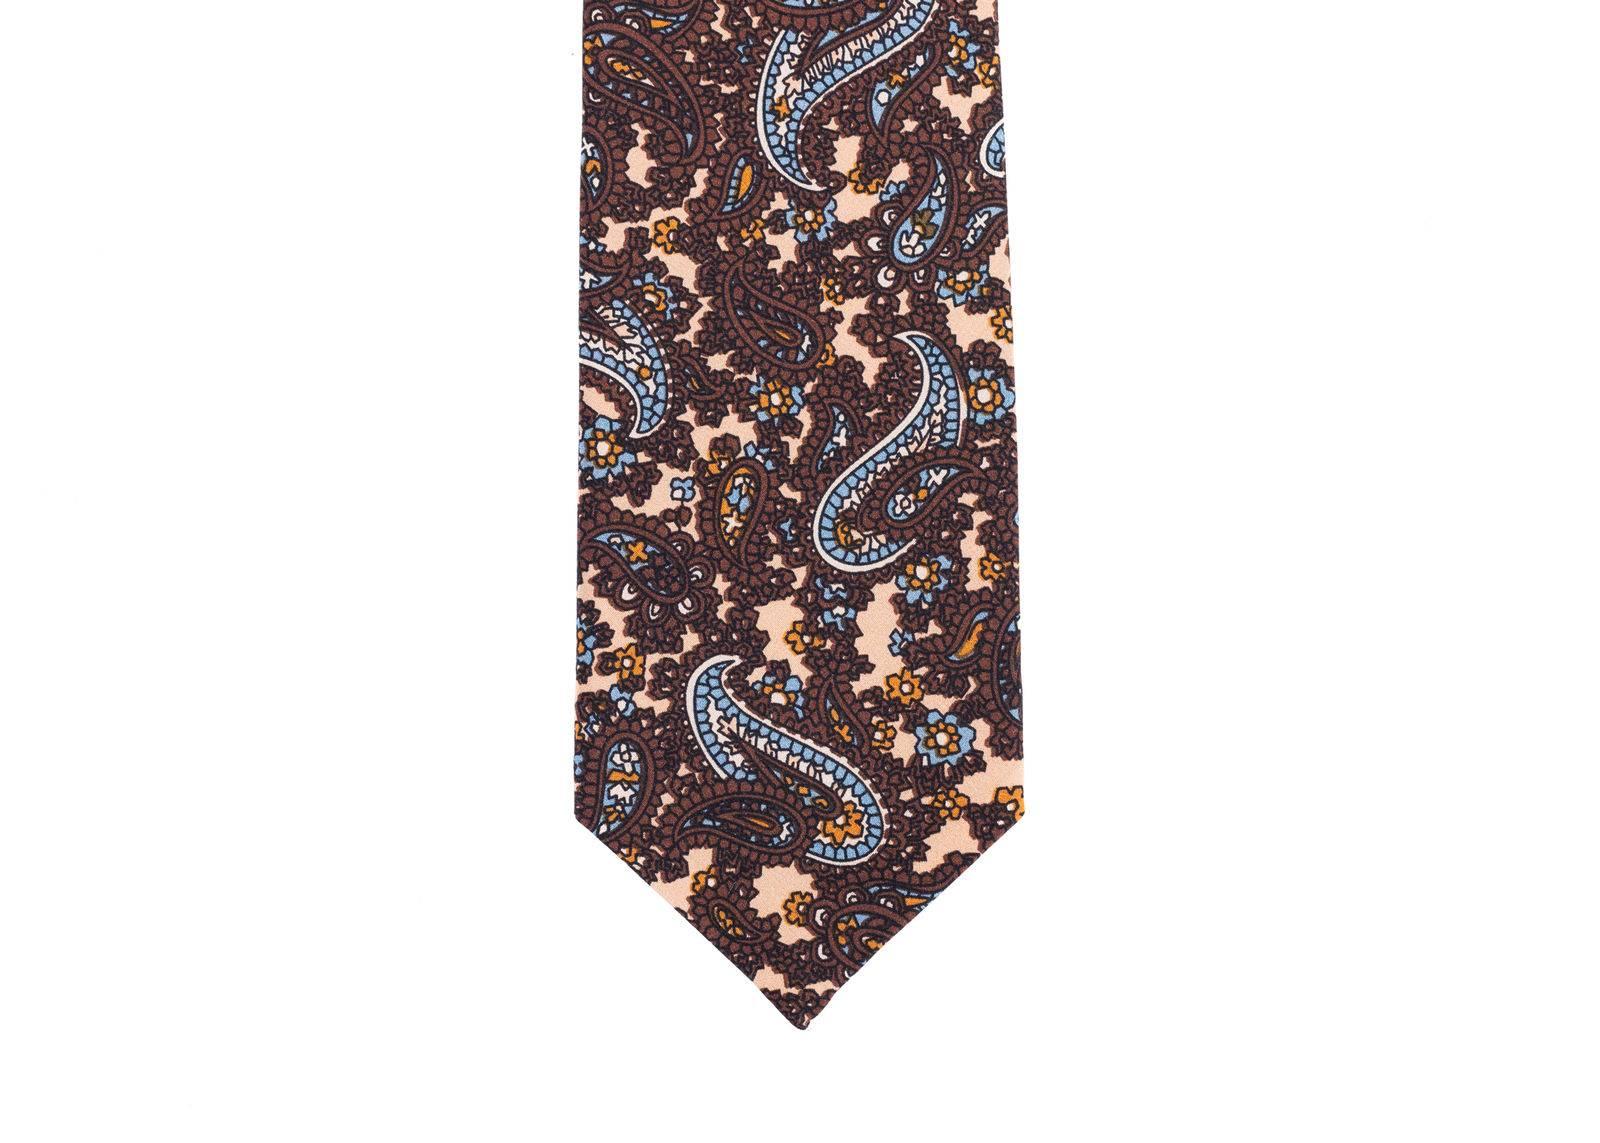 Rare Tom Ford Luxurious Brown Leaf Floral Paisley 3 1/4